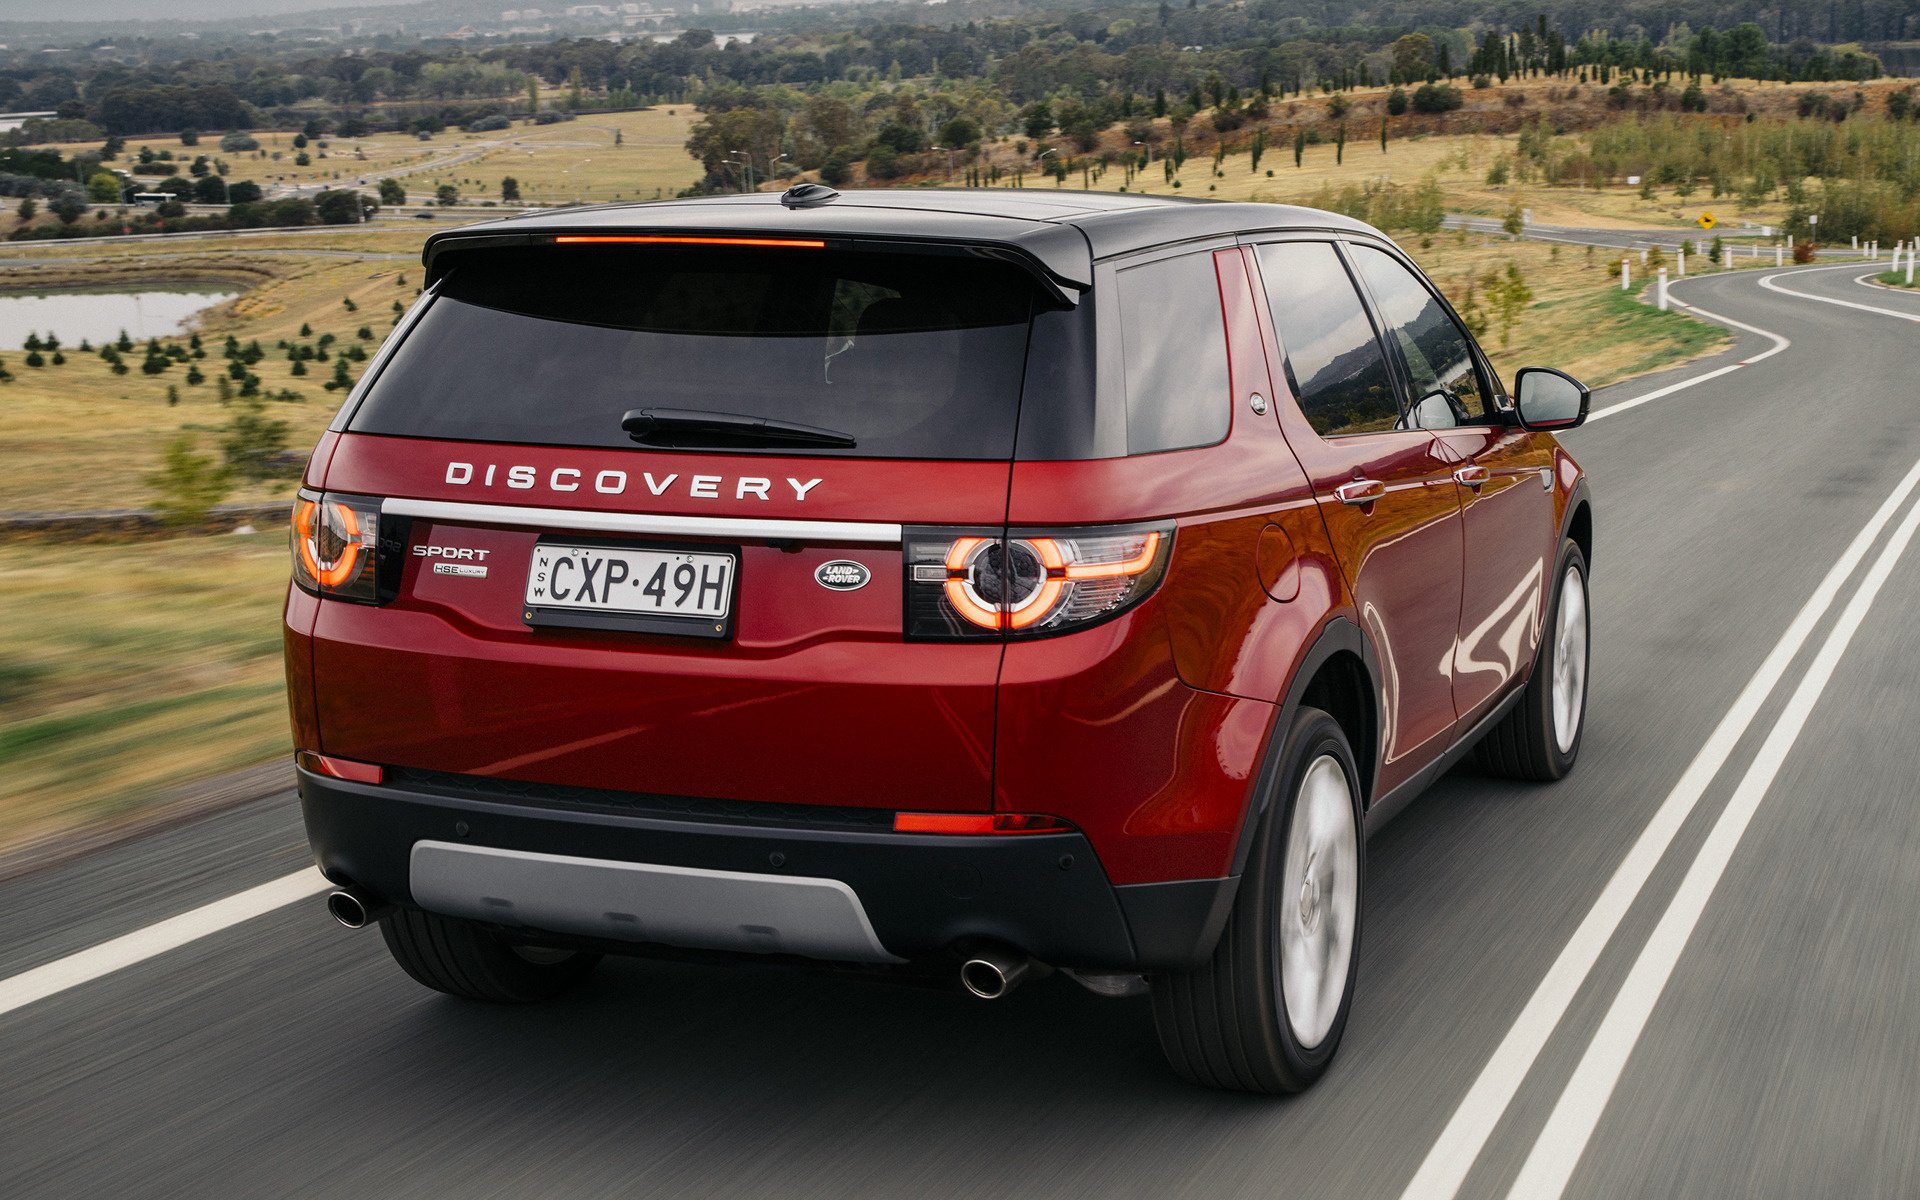 Ленд ровер дискавери 2015. Ленд Ровер Дискавери спорт 2015. Land Rover Discovery Sport 2015. Range Rover Discovery Sport 2015.